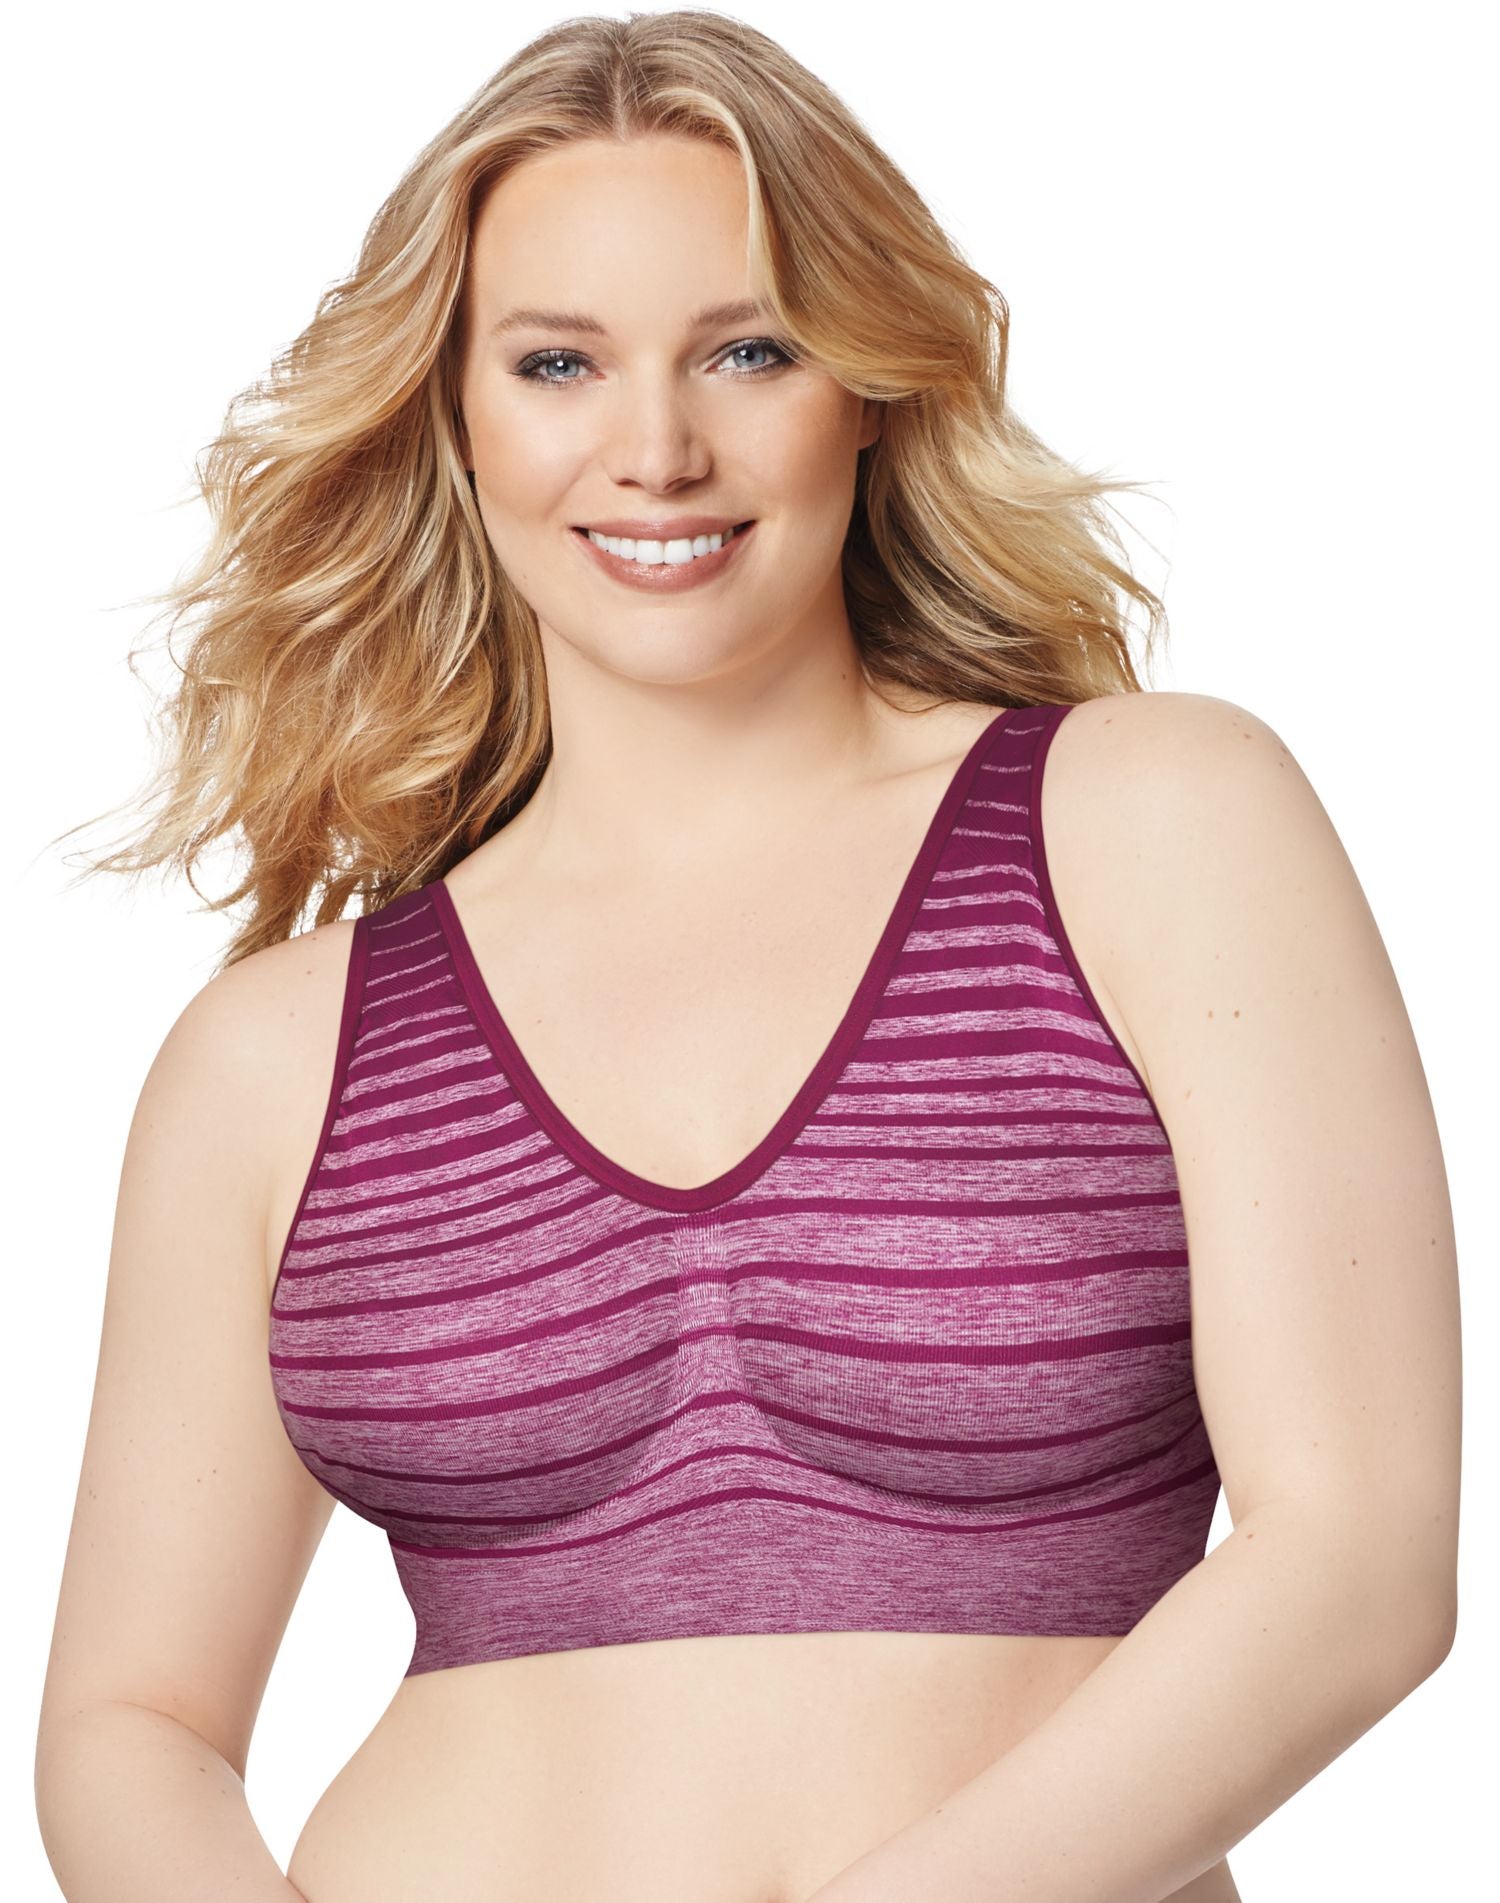 Product Review: “The Just My Size Pure Comfort™ Seamless Wirefree